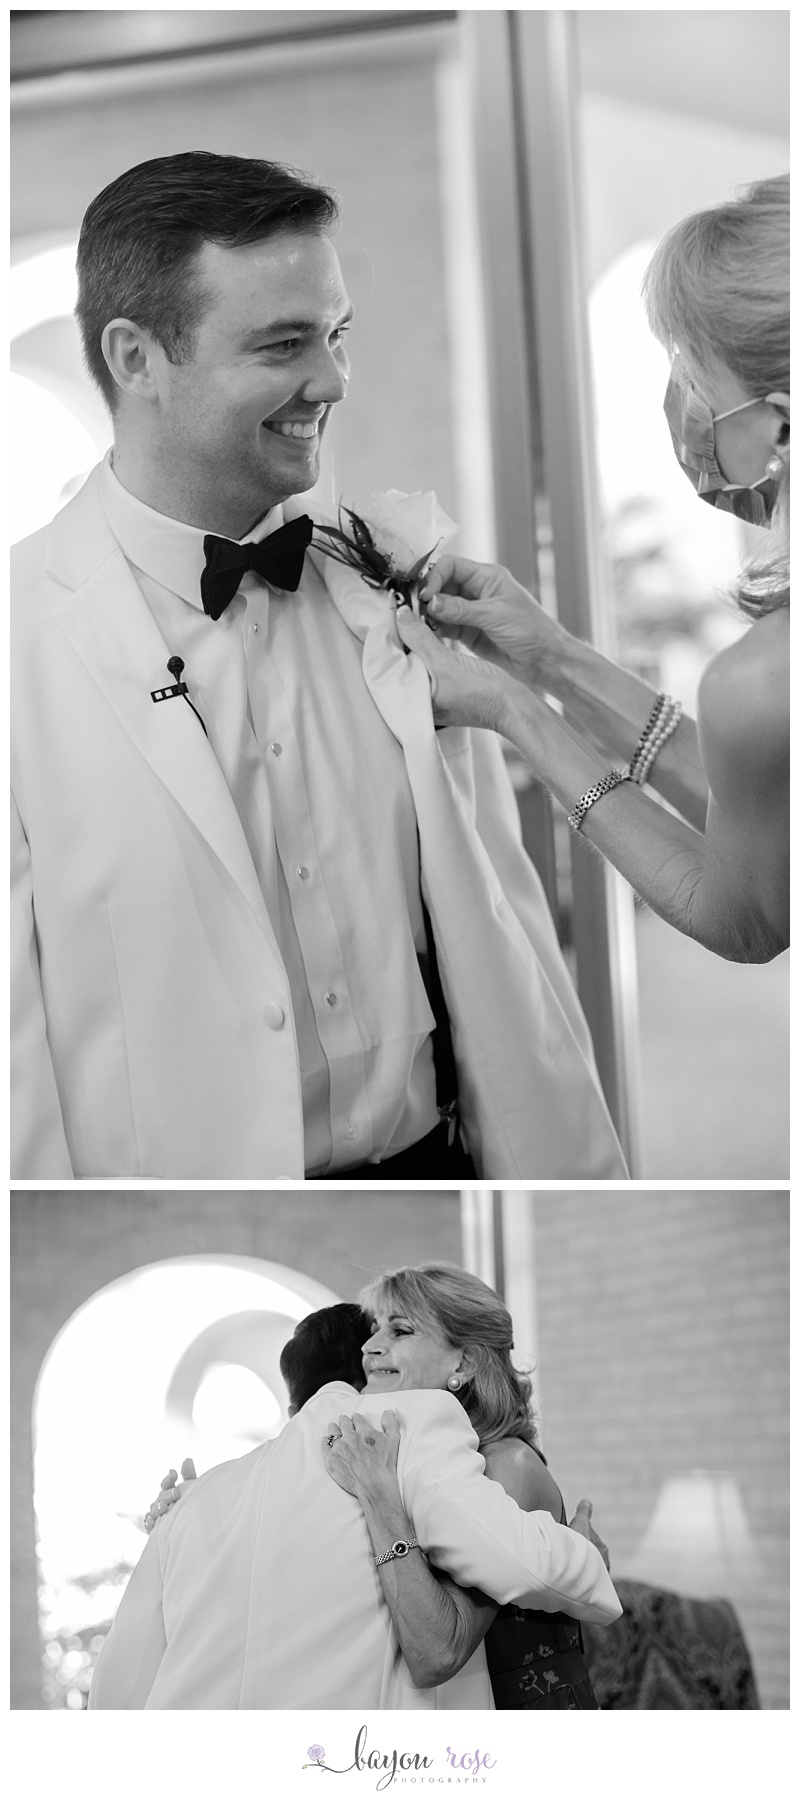 Groom getting boutonniere pinned by his mother on his wedding day, while his mom wears a mask